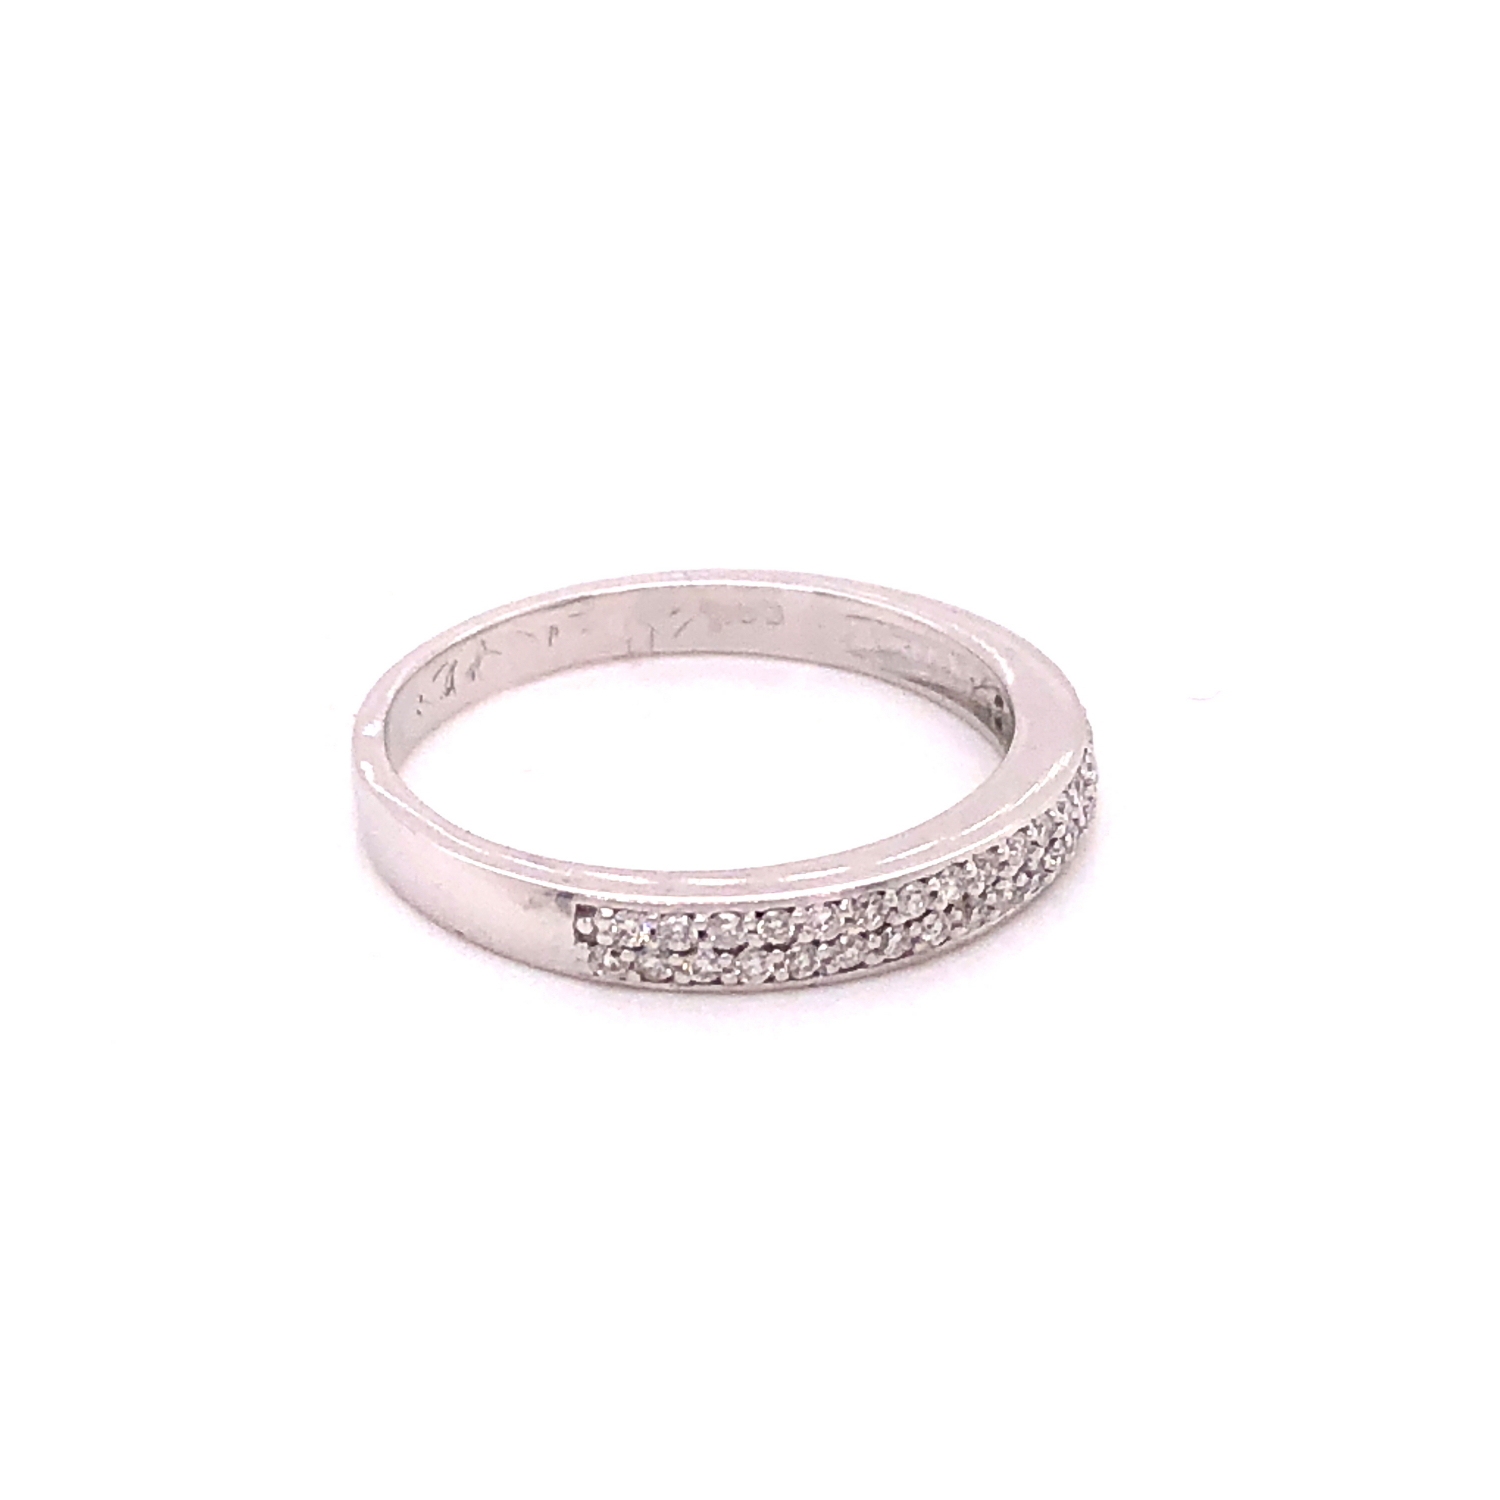 A 14ct WHITE GOLD TWO ROW DIAMOND SET HALF ETERNITY RING. FINGER SIZE M 1/2, GROSS WEIGHT 2.2grms.